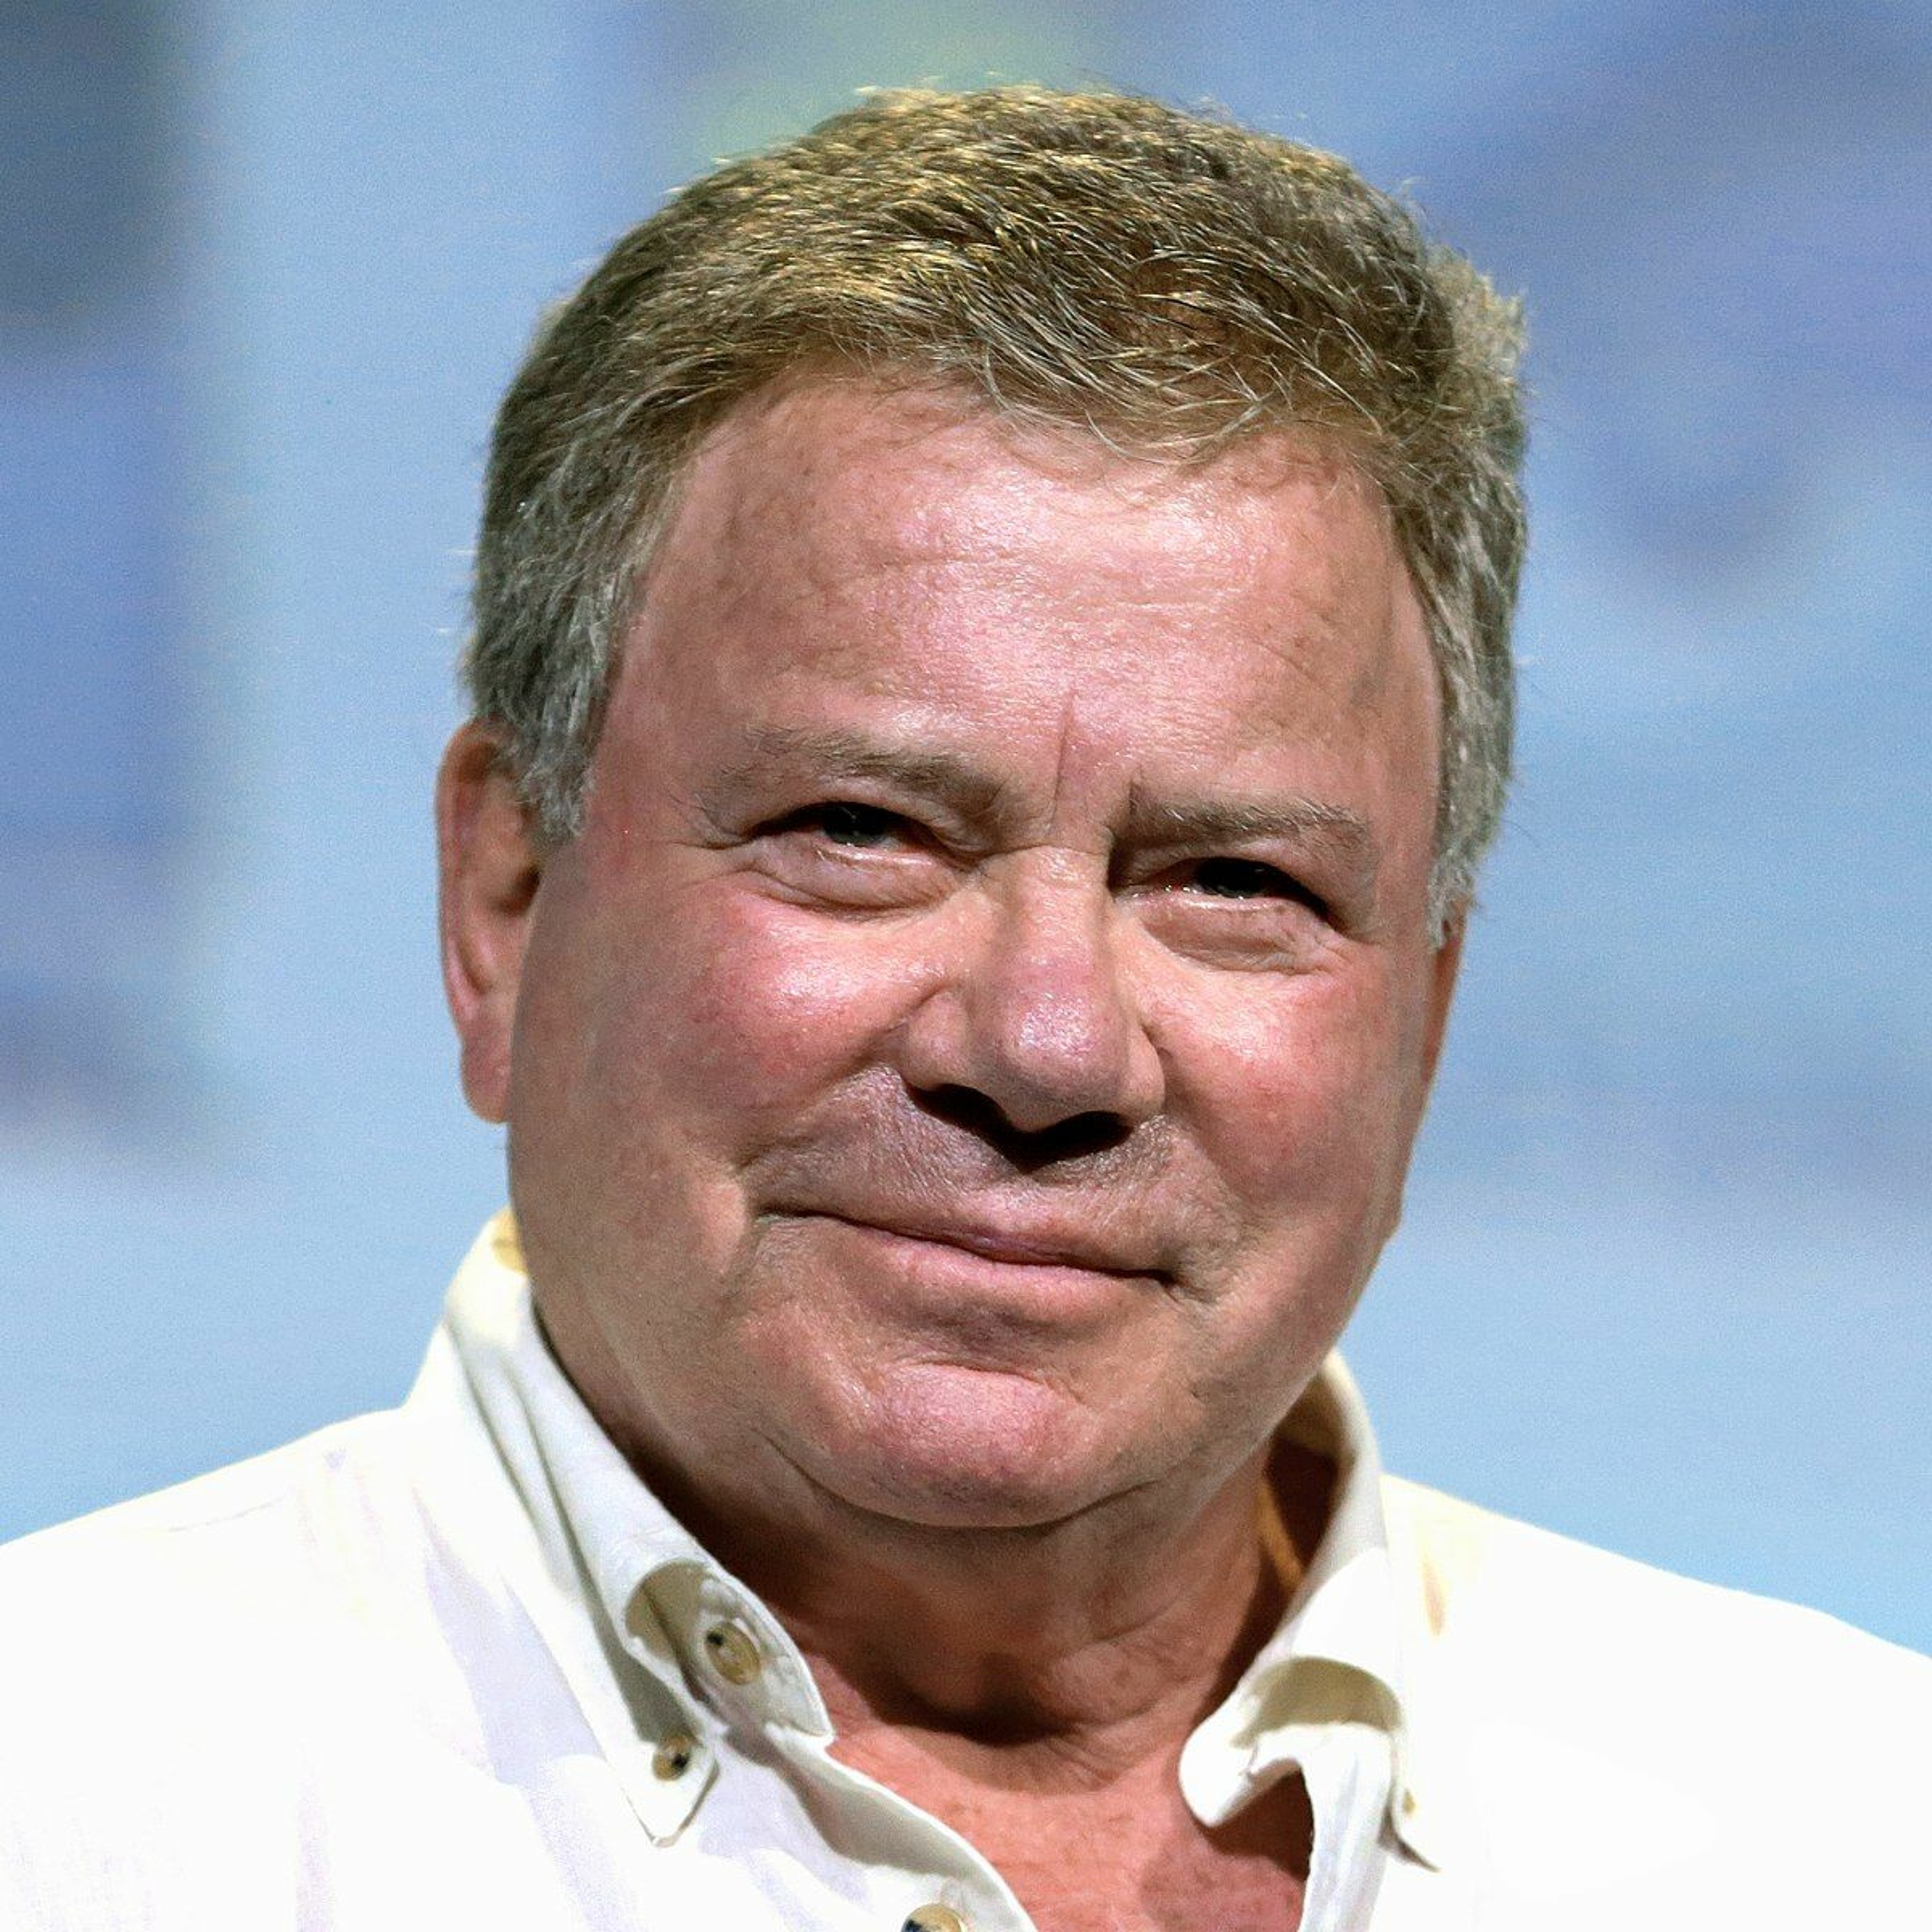 A Song For William Shatner - Where Can I go but to the LORD?